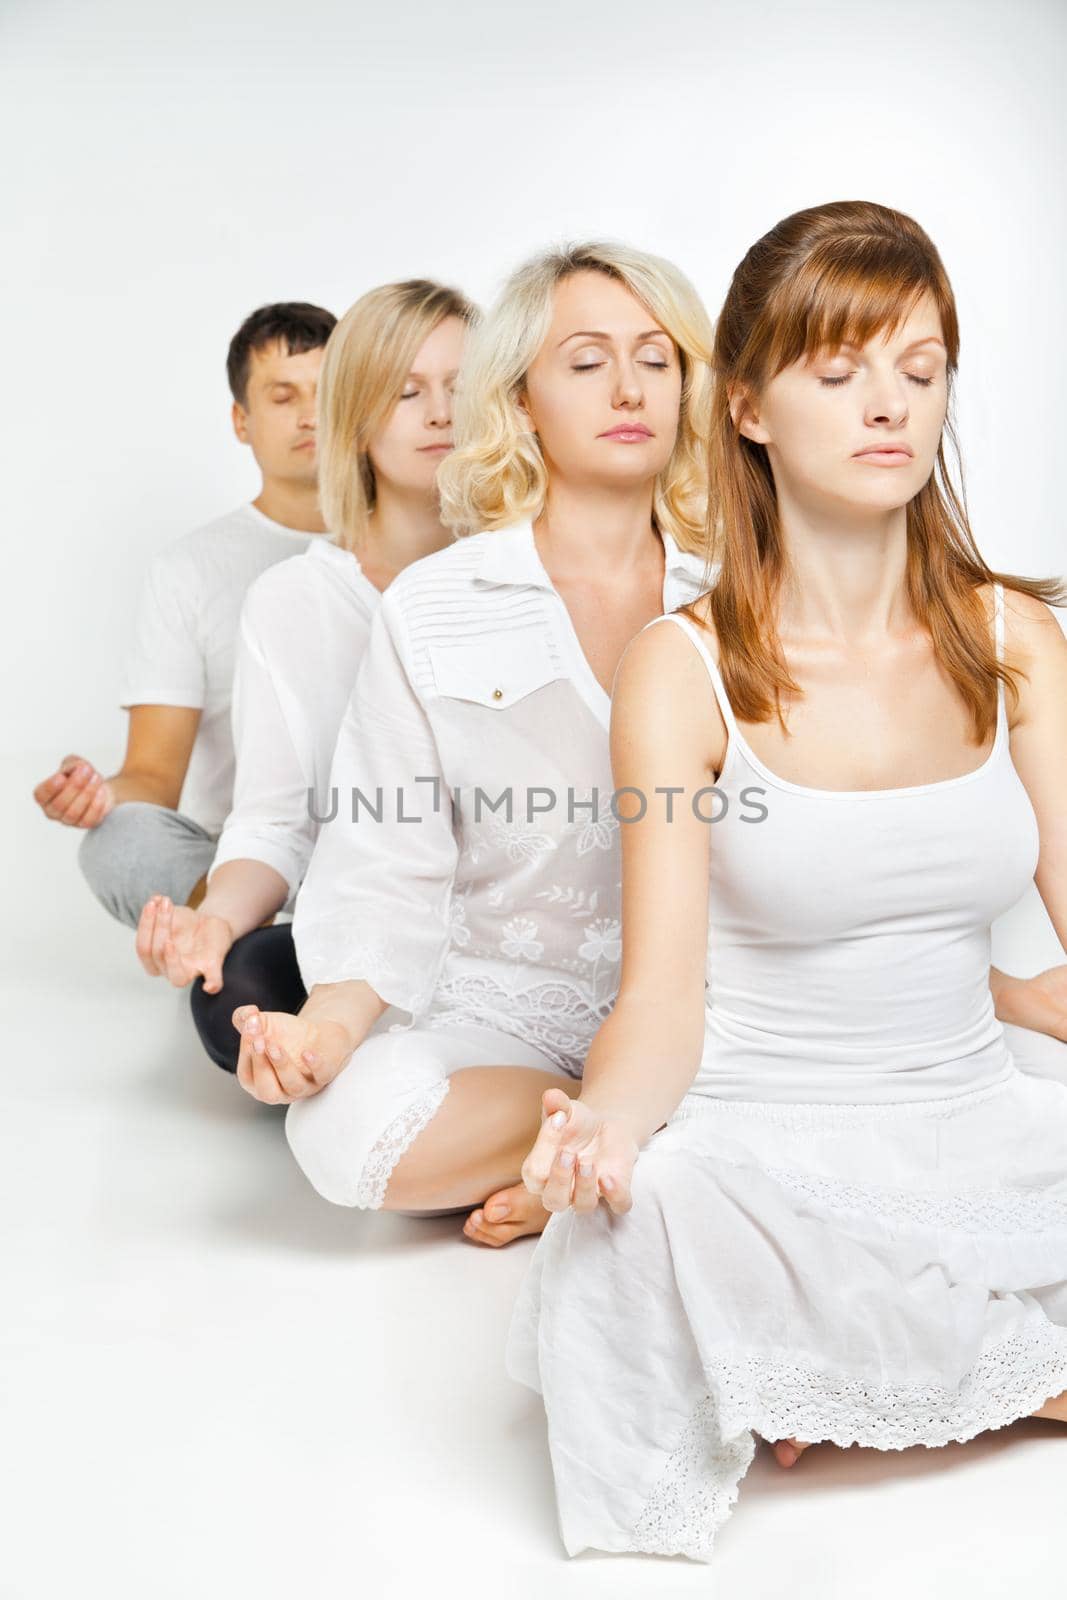 Group of people relaxing and doing yoga in white by Julenochek